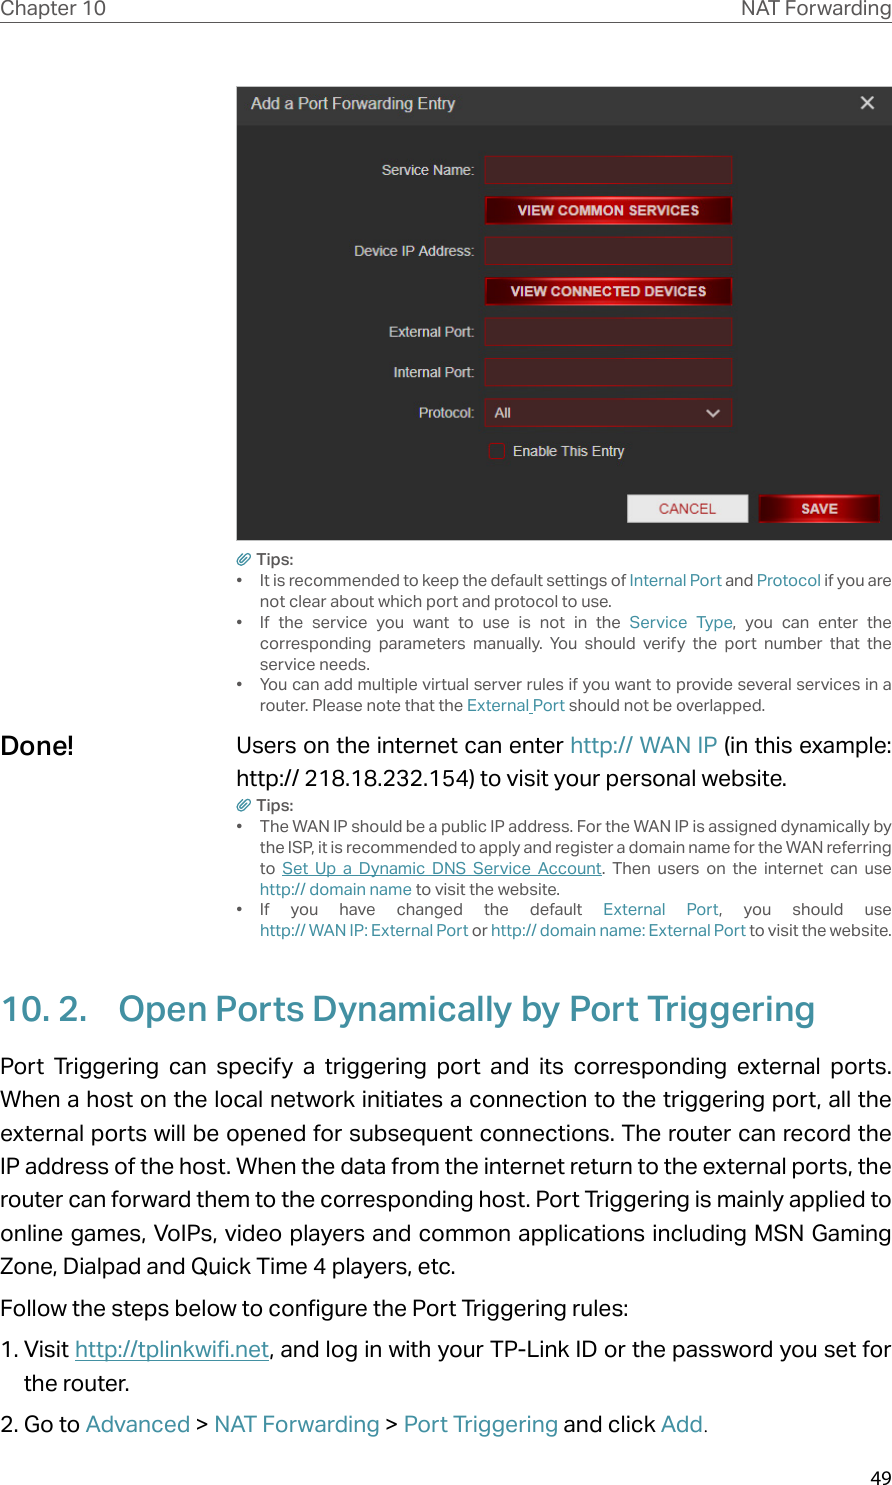 49Chapter 10 NAT ForwardingTips:•  It is recommended to keep the default settings of Internal Port and Protocol if you are not clear about which port and protocol to use.•  If the service you want to use is not in the Service Type, you can enter the corresponding parameters manually. You should verify the port number that the service needs.•  You can add multiple virtual server rules if you want to provide several services in a router. Please note that the External Port should not be overlapped.Users on the internet can enter http:// WAN IP (in this example: http:// 218.18.232.154) to visit your personal website.Tips:•  The WAN IP should be a public IP address. For the WAN IP is assigned dynamically by the ISP, it is recommended to apply and register a domain name for the WAN referring to  Set Up a Dynamic DNS Service Account. Then users on the internet can use  http:// domain name to visit the website.•  If you have changed the default External Port, you should use  http:// WAN IP: External Port or http:// domain name: External Port to visit the website.10. 2.  Open Ports Dynamically by Port TriggeringPort Triggering can specify a triggering port and its corresponding external ports. When a host on the local network initiates a connection to the triggering port, all the external ports will be opened for subsequent connections. The router can record the IP address of the host. When the data from the internet return to the external ports, the router can forward them to the corresponding host. Port Triggering is mainly applied to online games, VoIPs, video players and common applications including MSN Gaming Zone, Dialpad and Quick Time 4 players, etc. Follow the steps below to configure the Port Triggering rules:1. Visit http://tplinkwifi.net, and log in with your TP-Link ID or the password you set for the router.2. Go to Advanced &gt; NAT Forwarding &gt; Port Triggering and click Add.Done!